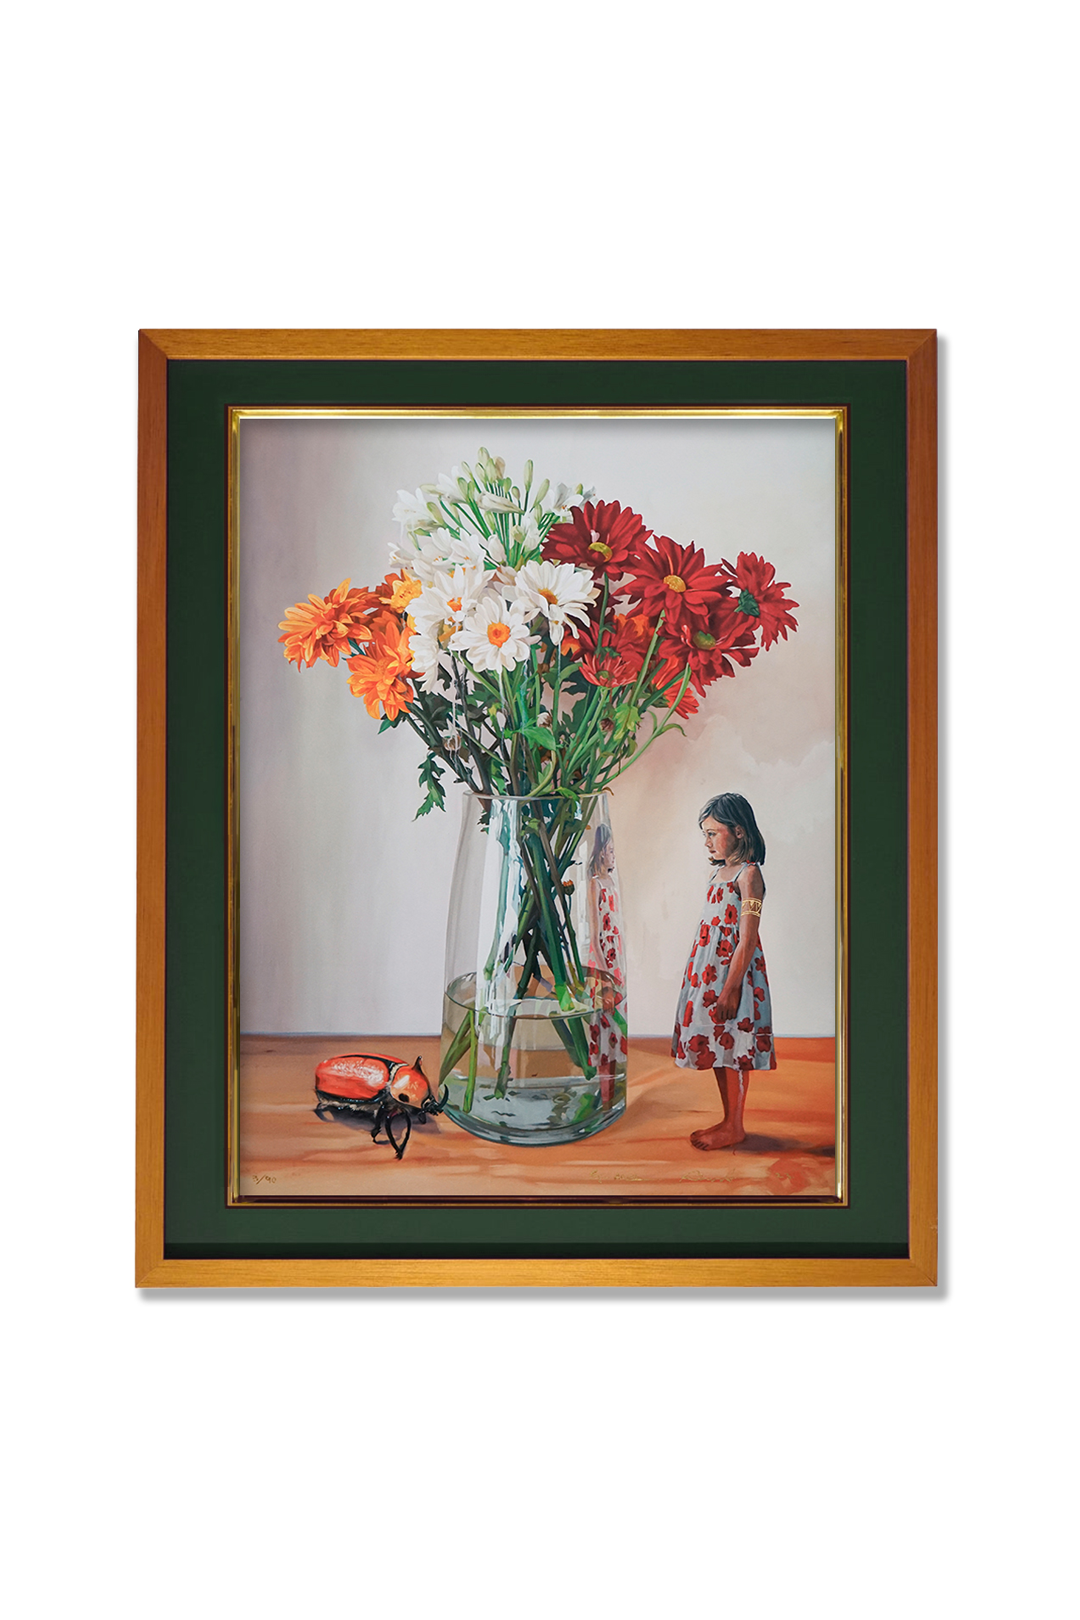 Reflejo / Limited Edition Giclee